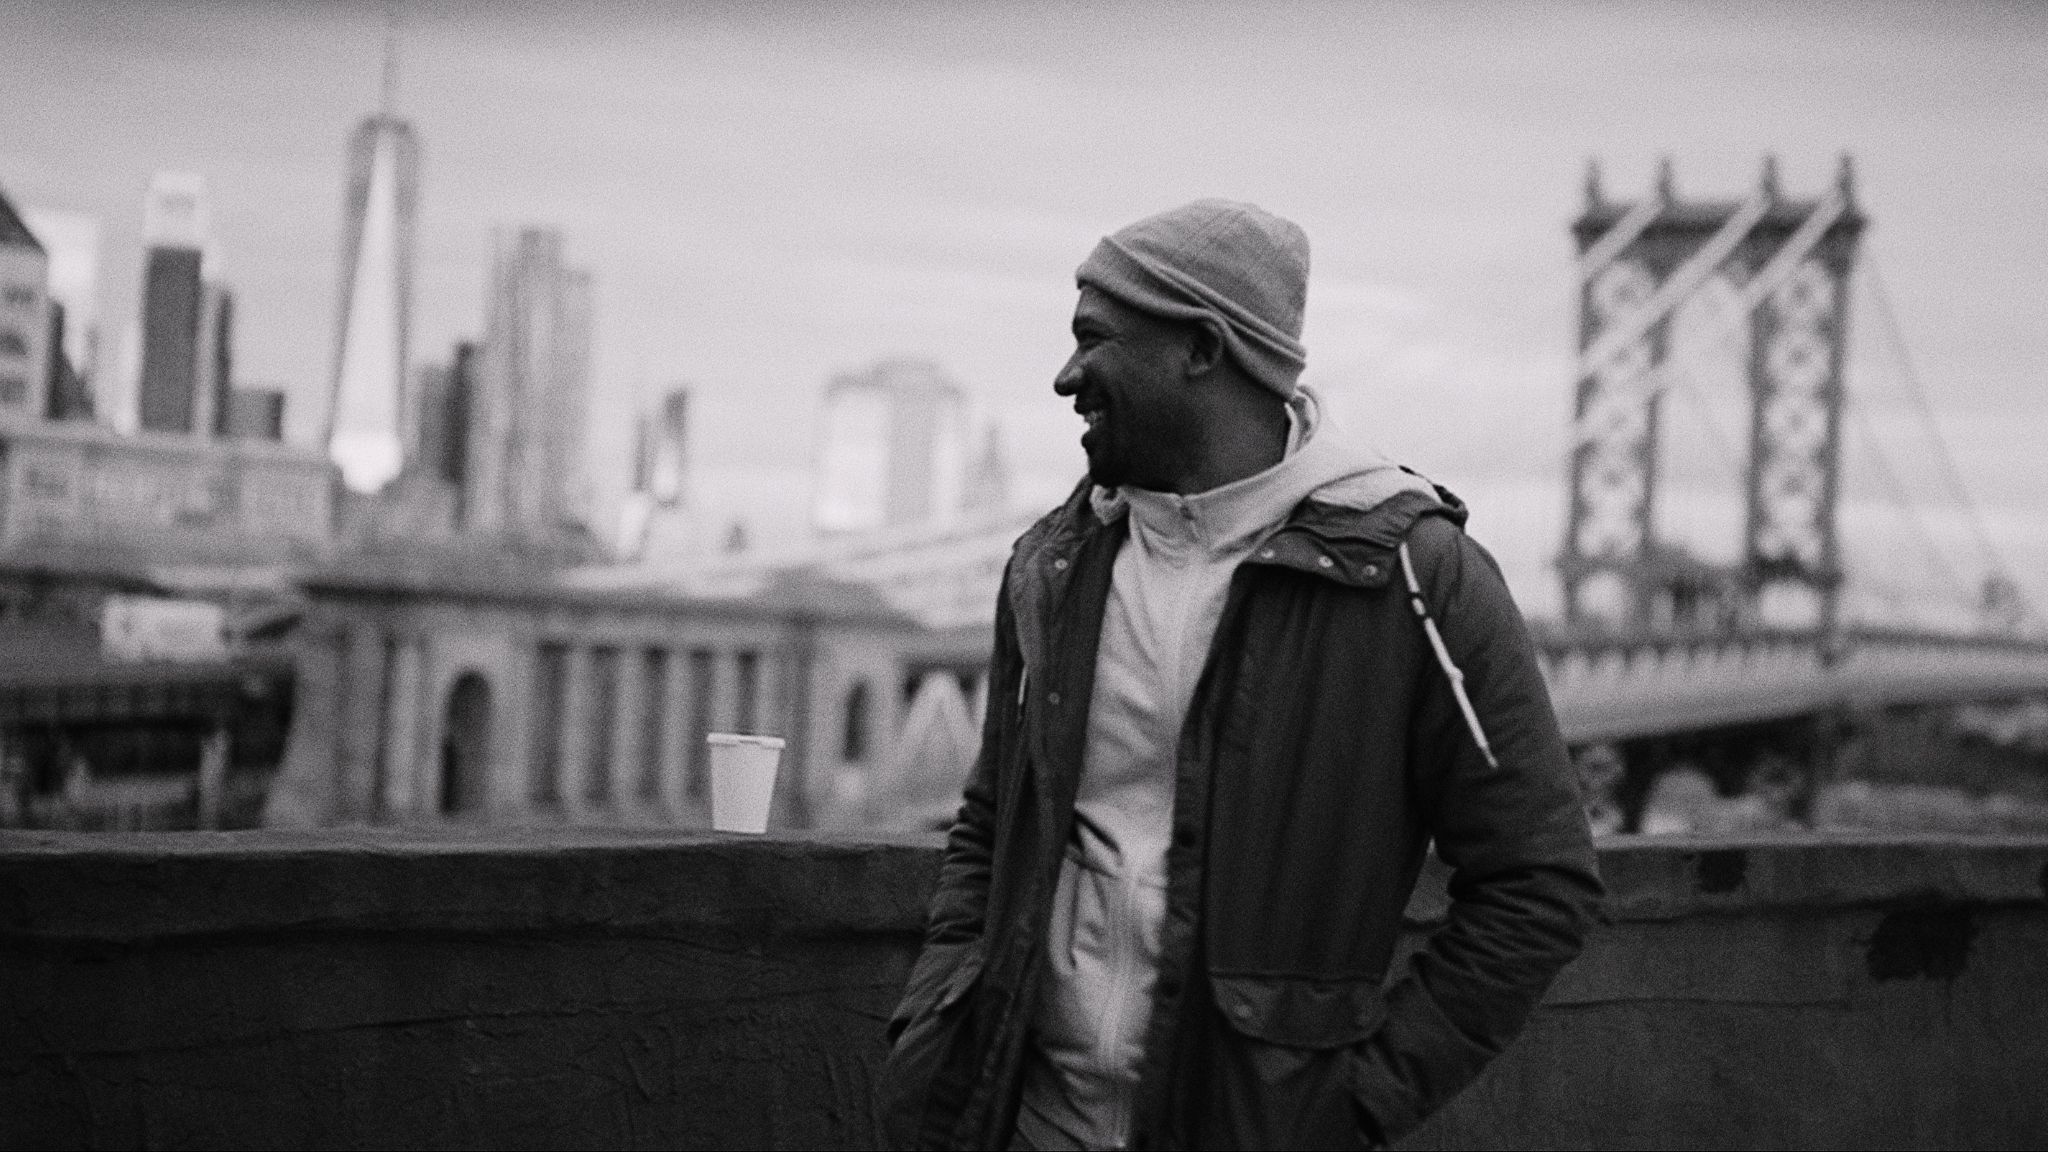 From NY, I Love You Black and white of Joshua looking off over the city smiling